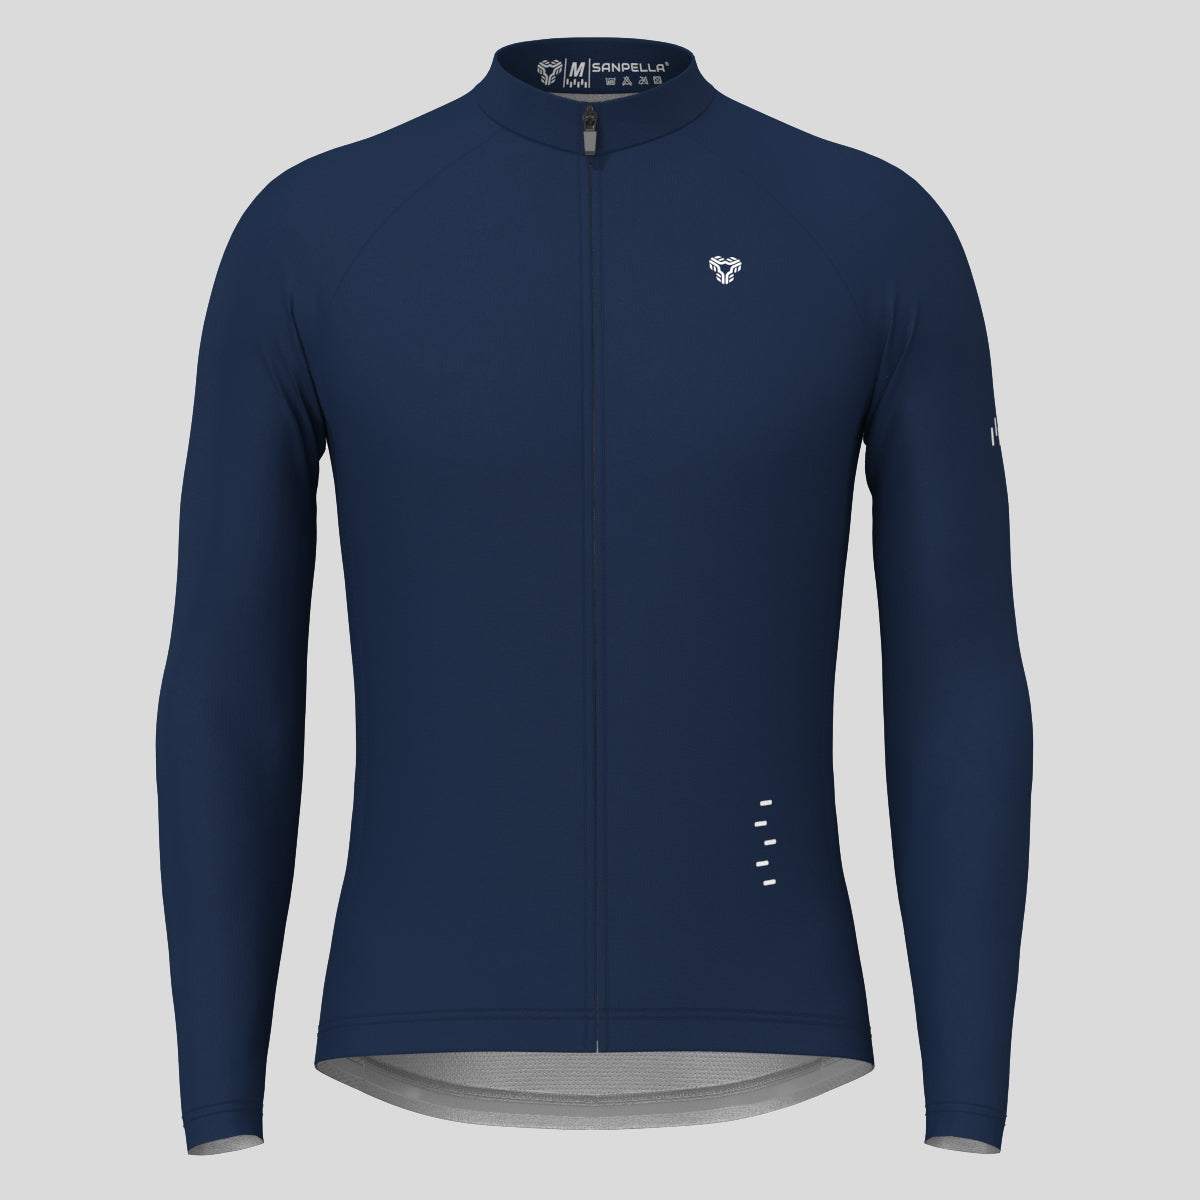 Men's Minimal Solid LS Cycling Jersey - Navy